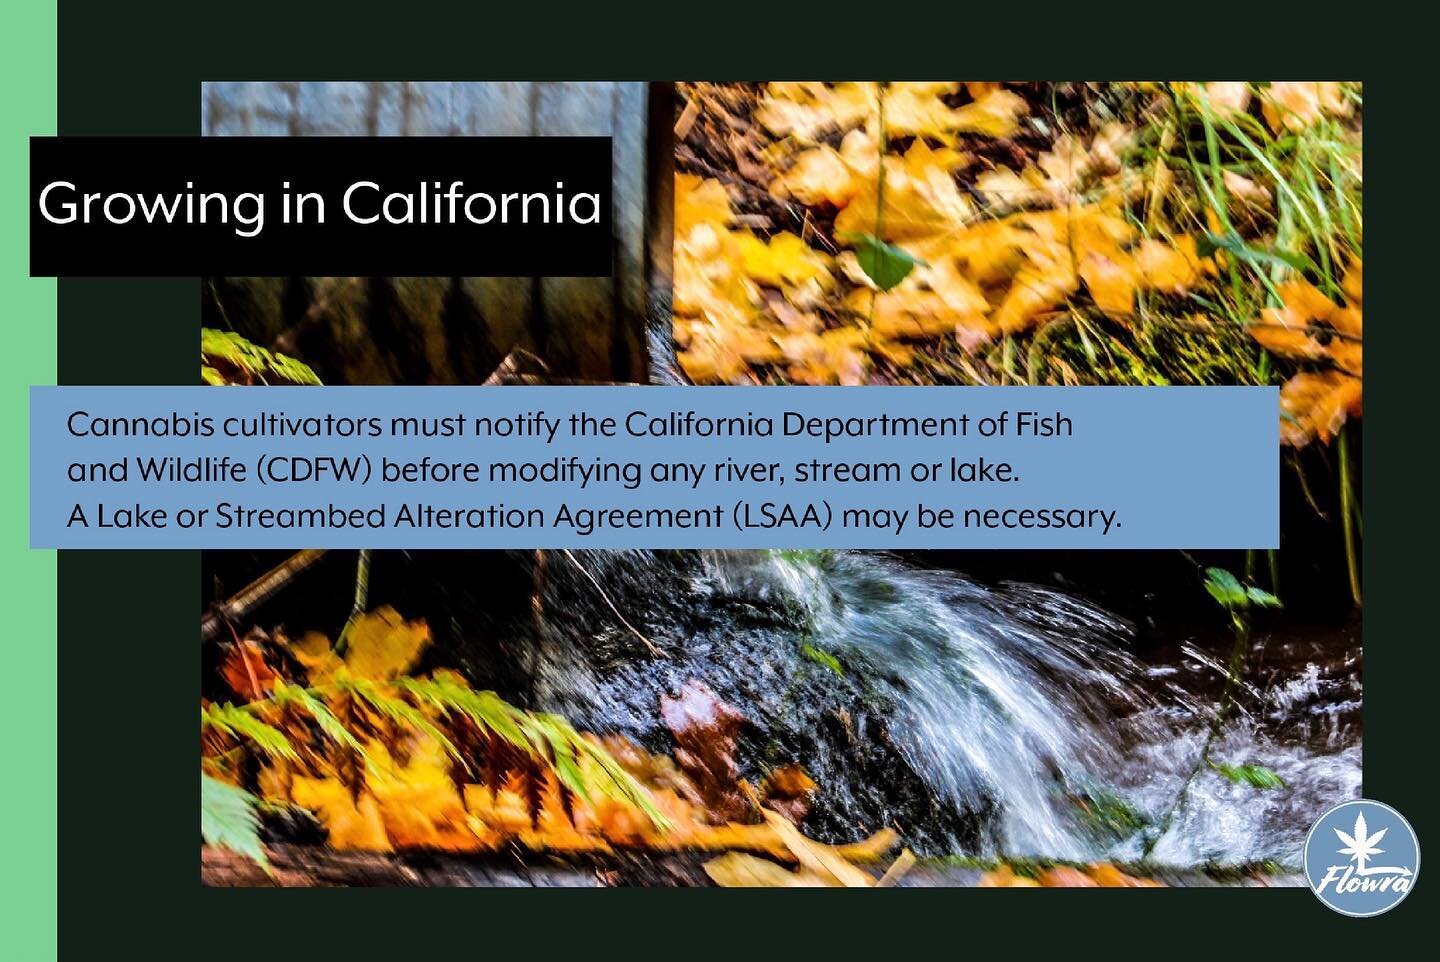 Think before you act. Growing in California requires you to be a mindful steward of our beautiful &amp; diverse landscape. Before modifying any lake, river or stream contact the California Dept. of Fish &amp; Wildlife. #cannabis #california #cannabiz